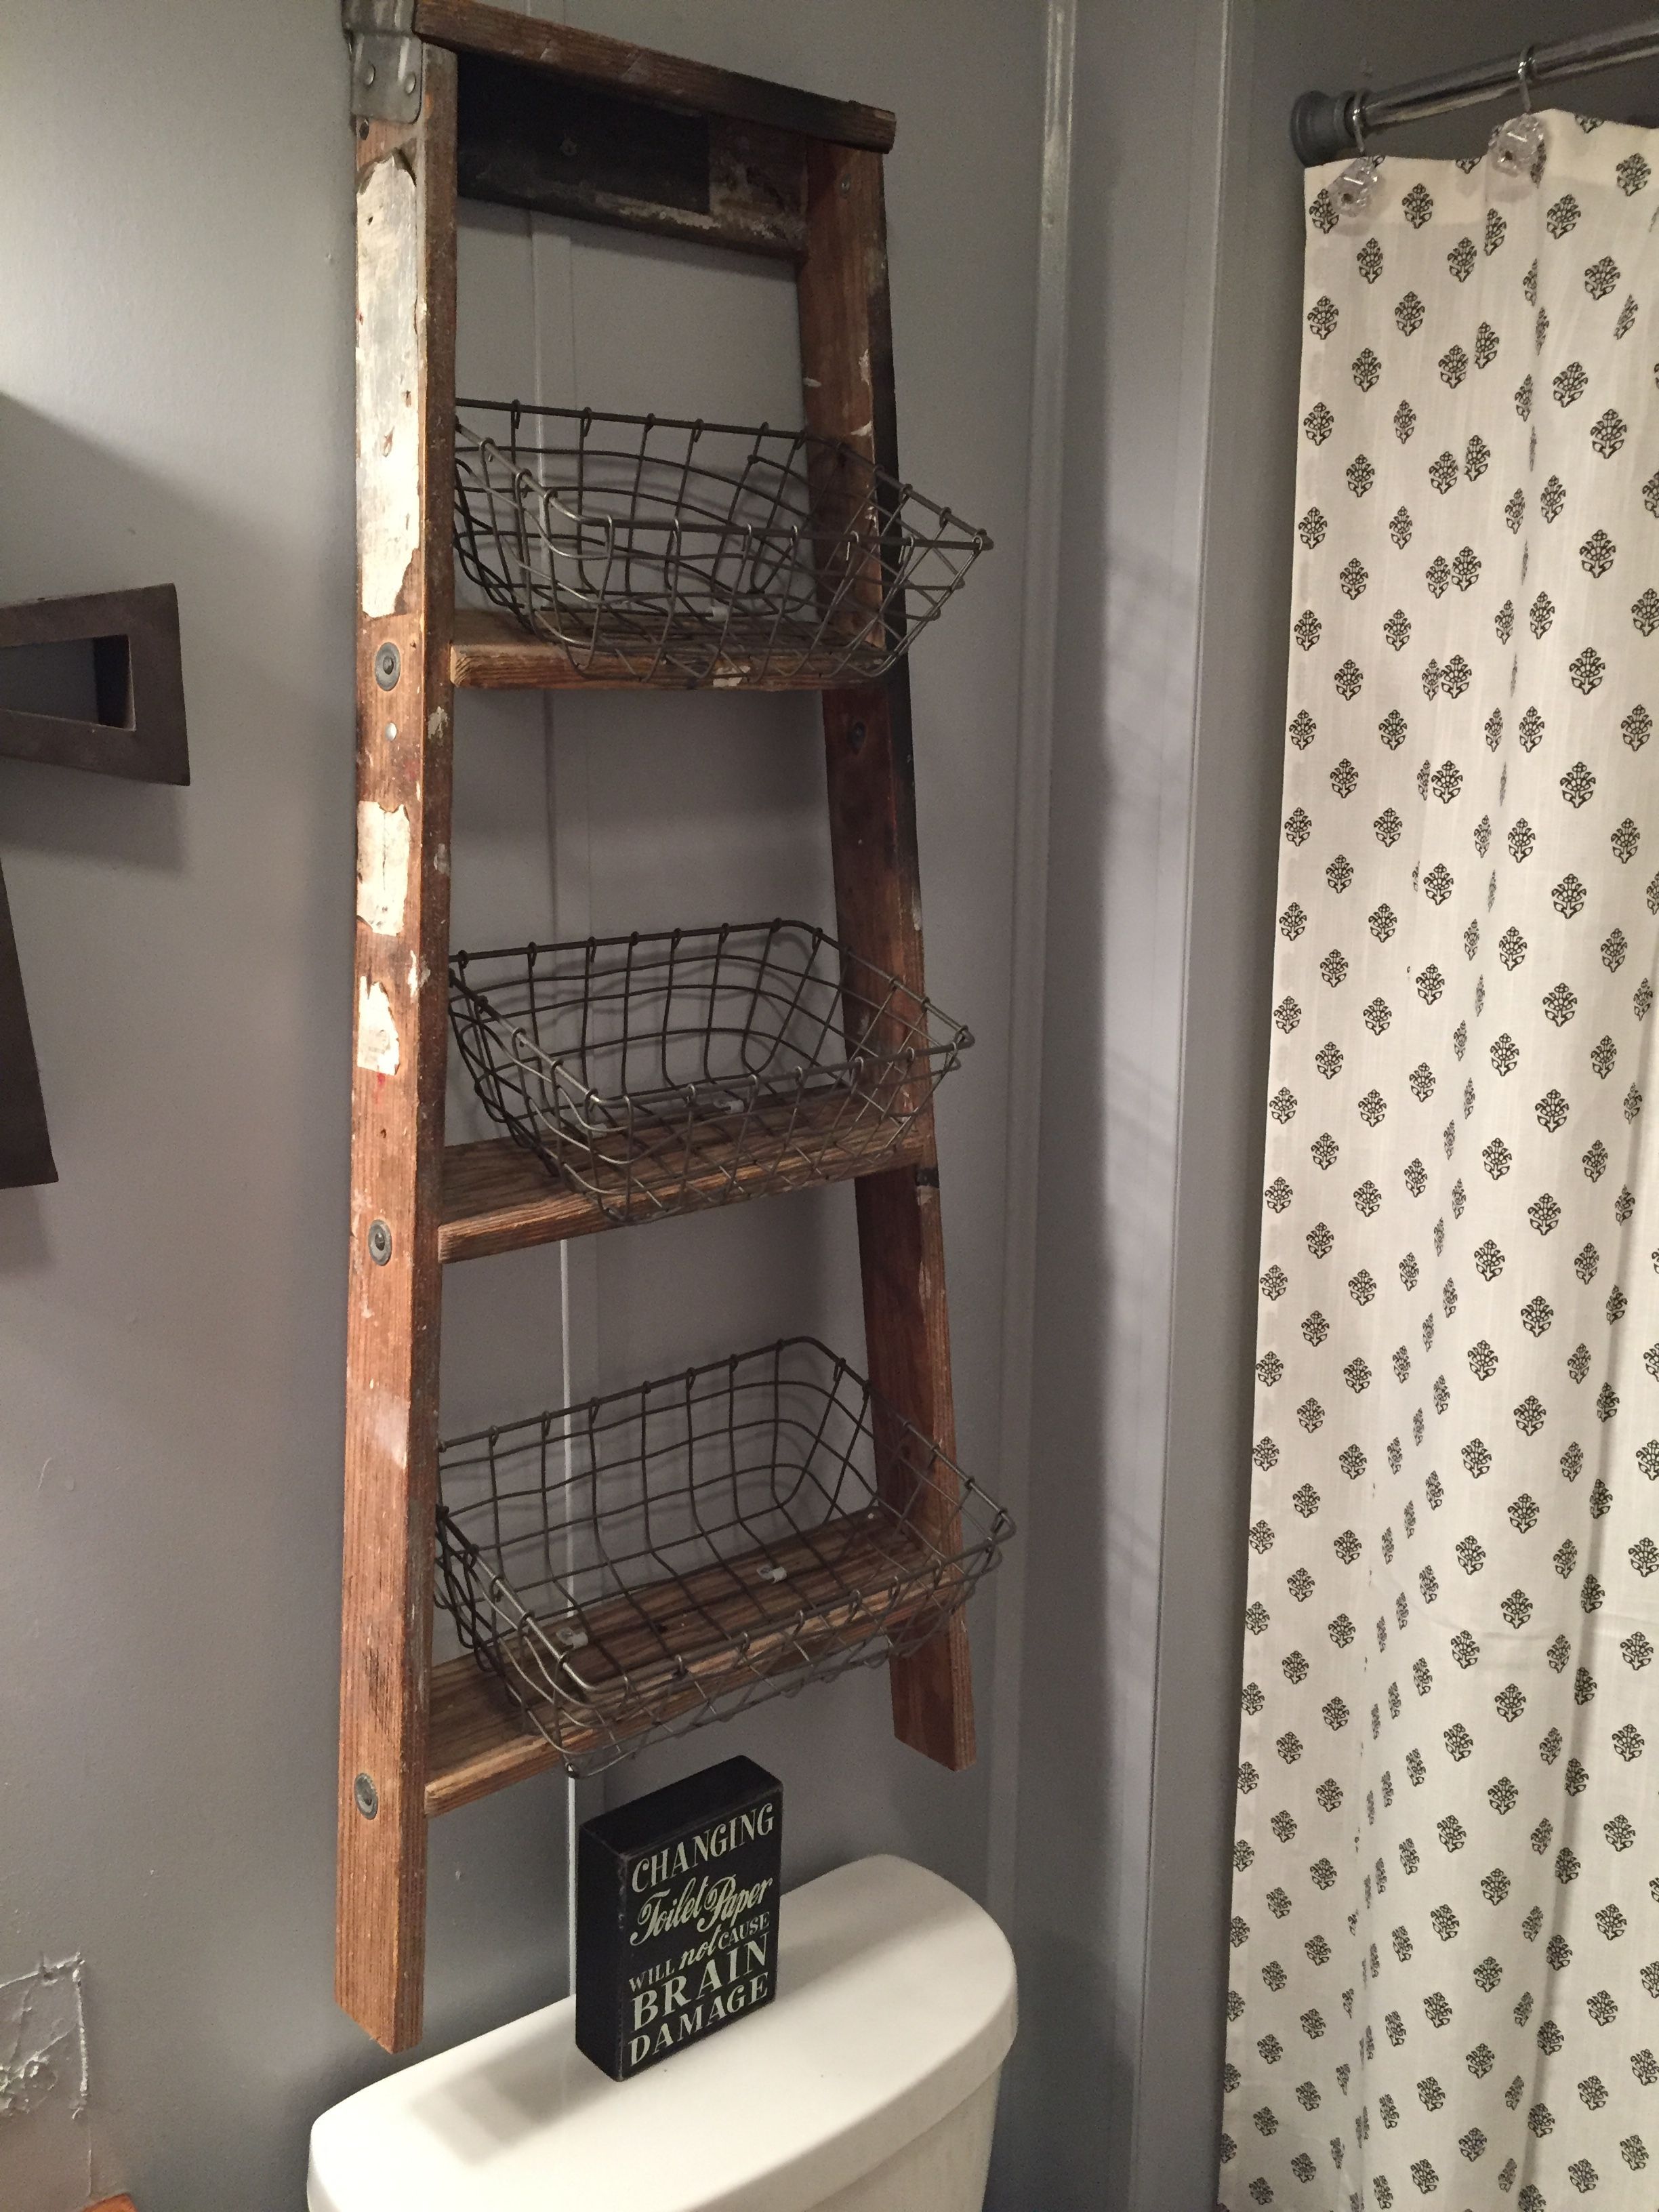 Old ladder turned into above bathroom storage!! I got a ladder out of the garbage bought some wire baskets and boom amazing